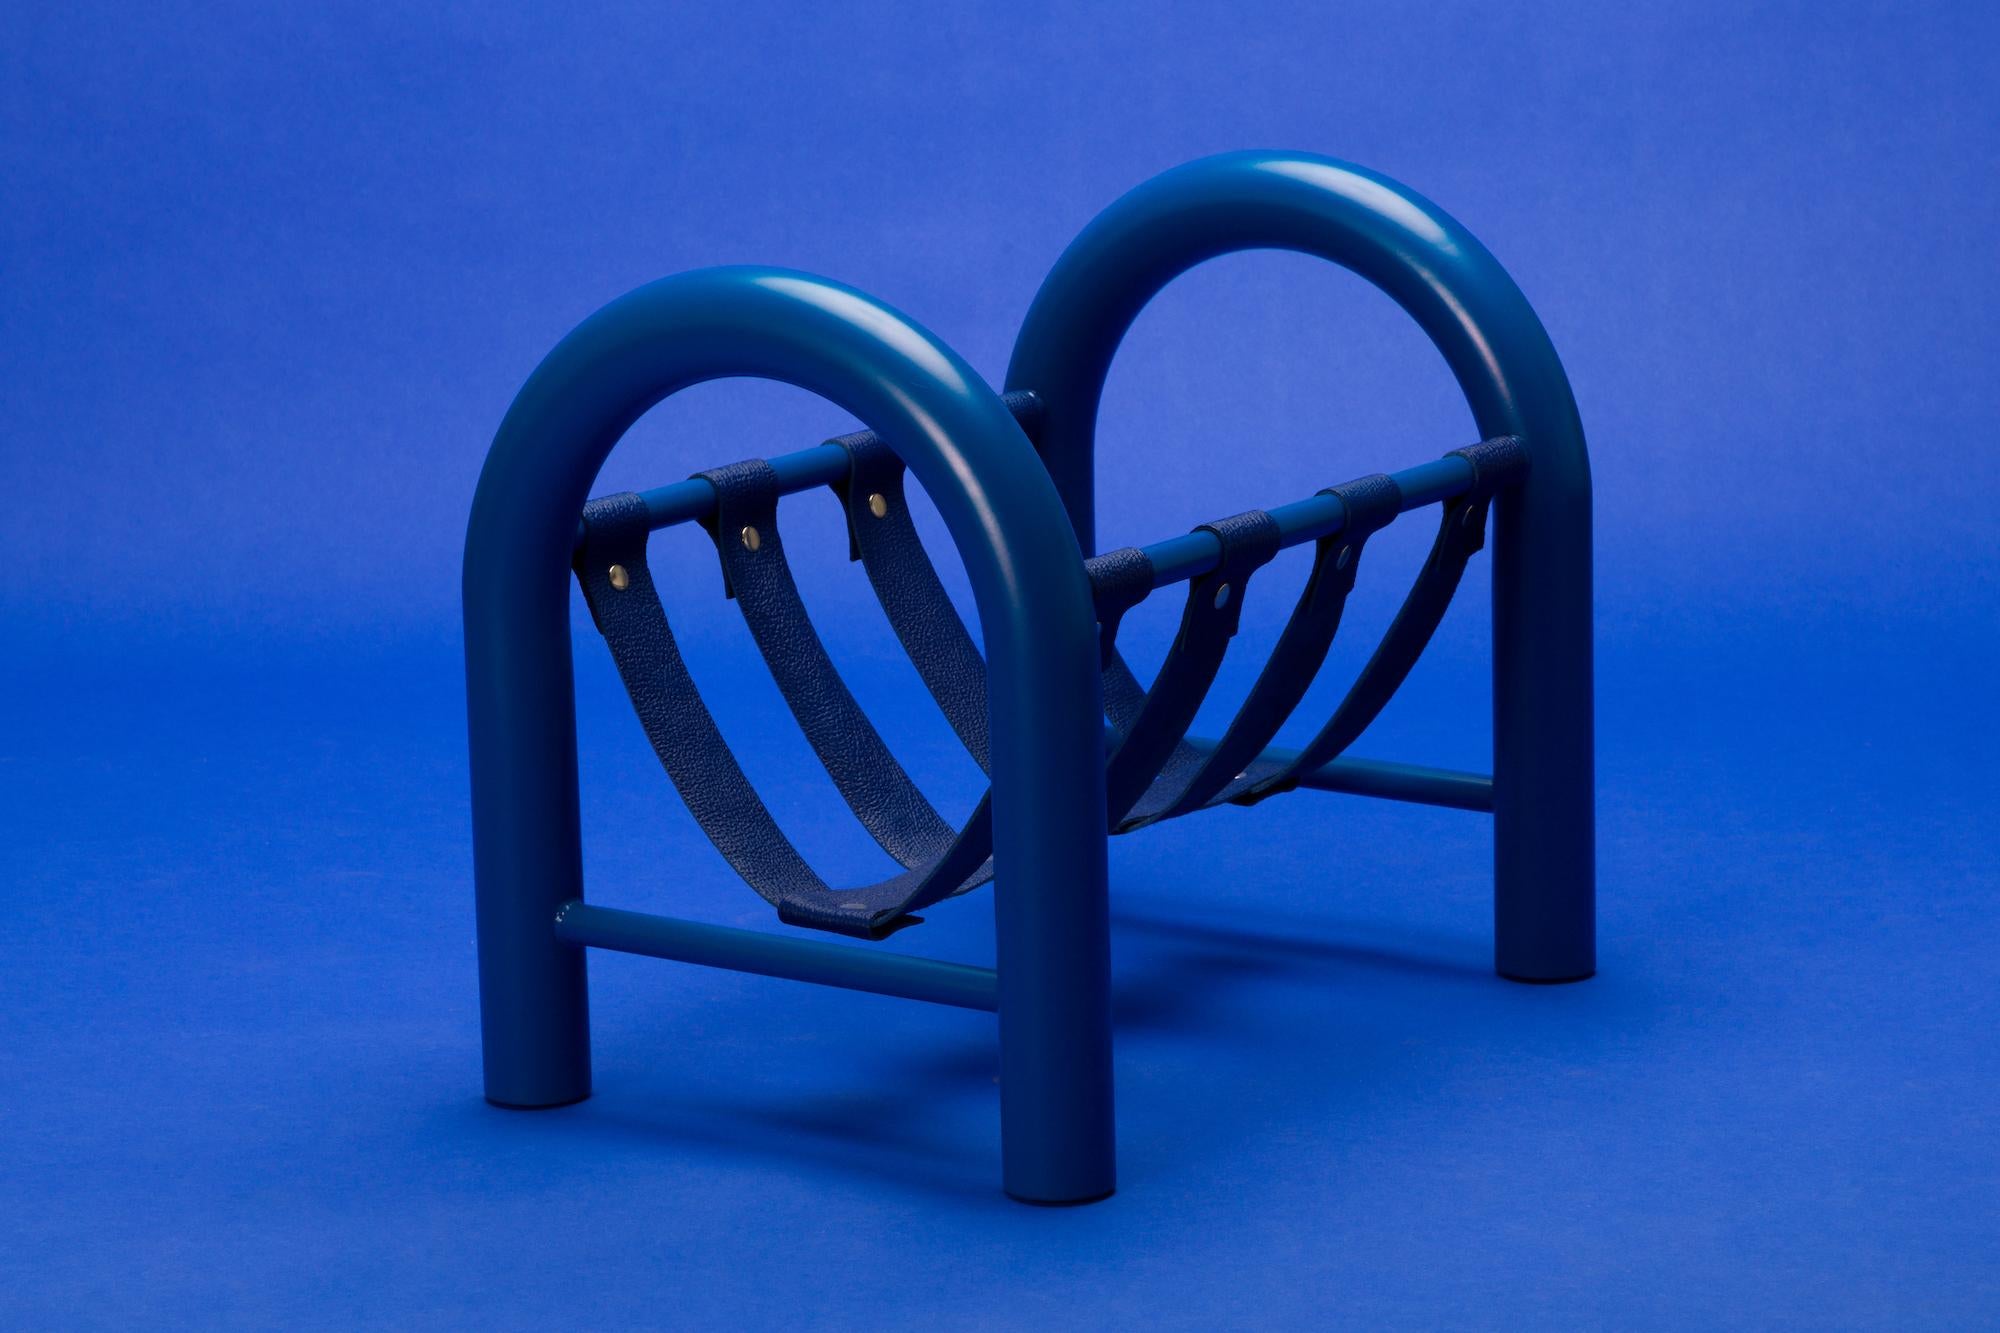 American Limited Edition Tubular Magazine Rack by Another Human, Blue